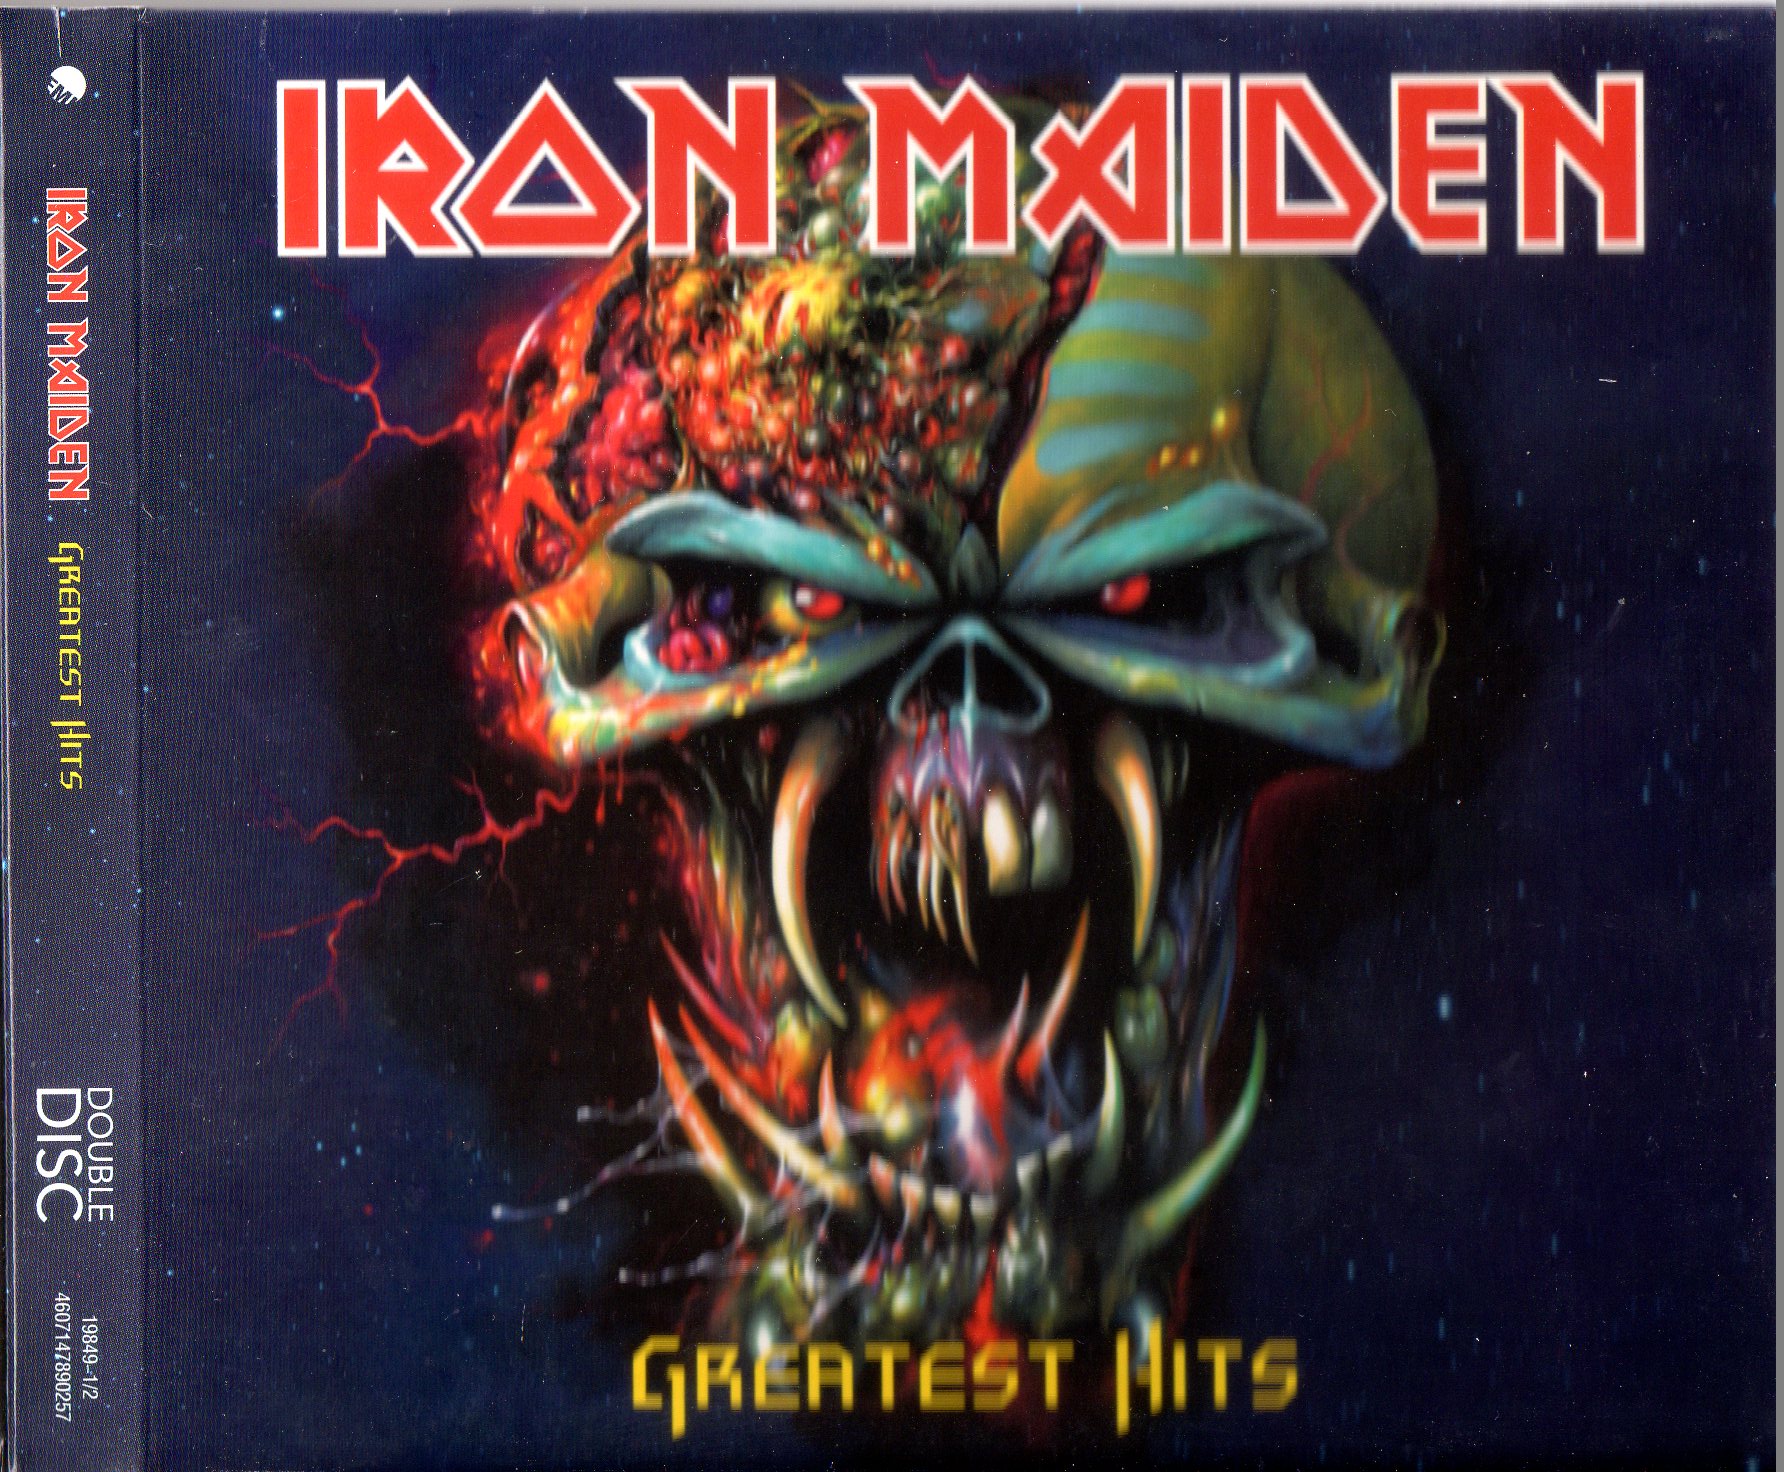 111a Greatest hits 1 - Iron Maiden Musique Collection